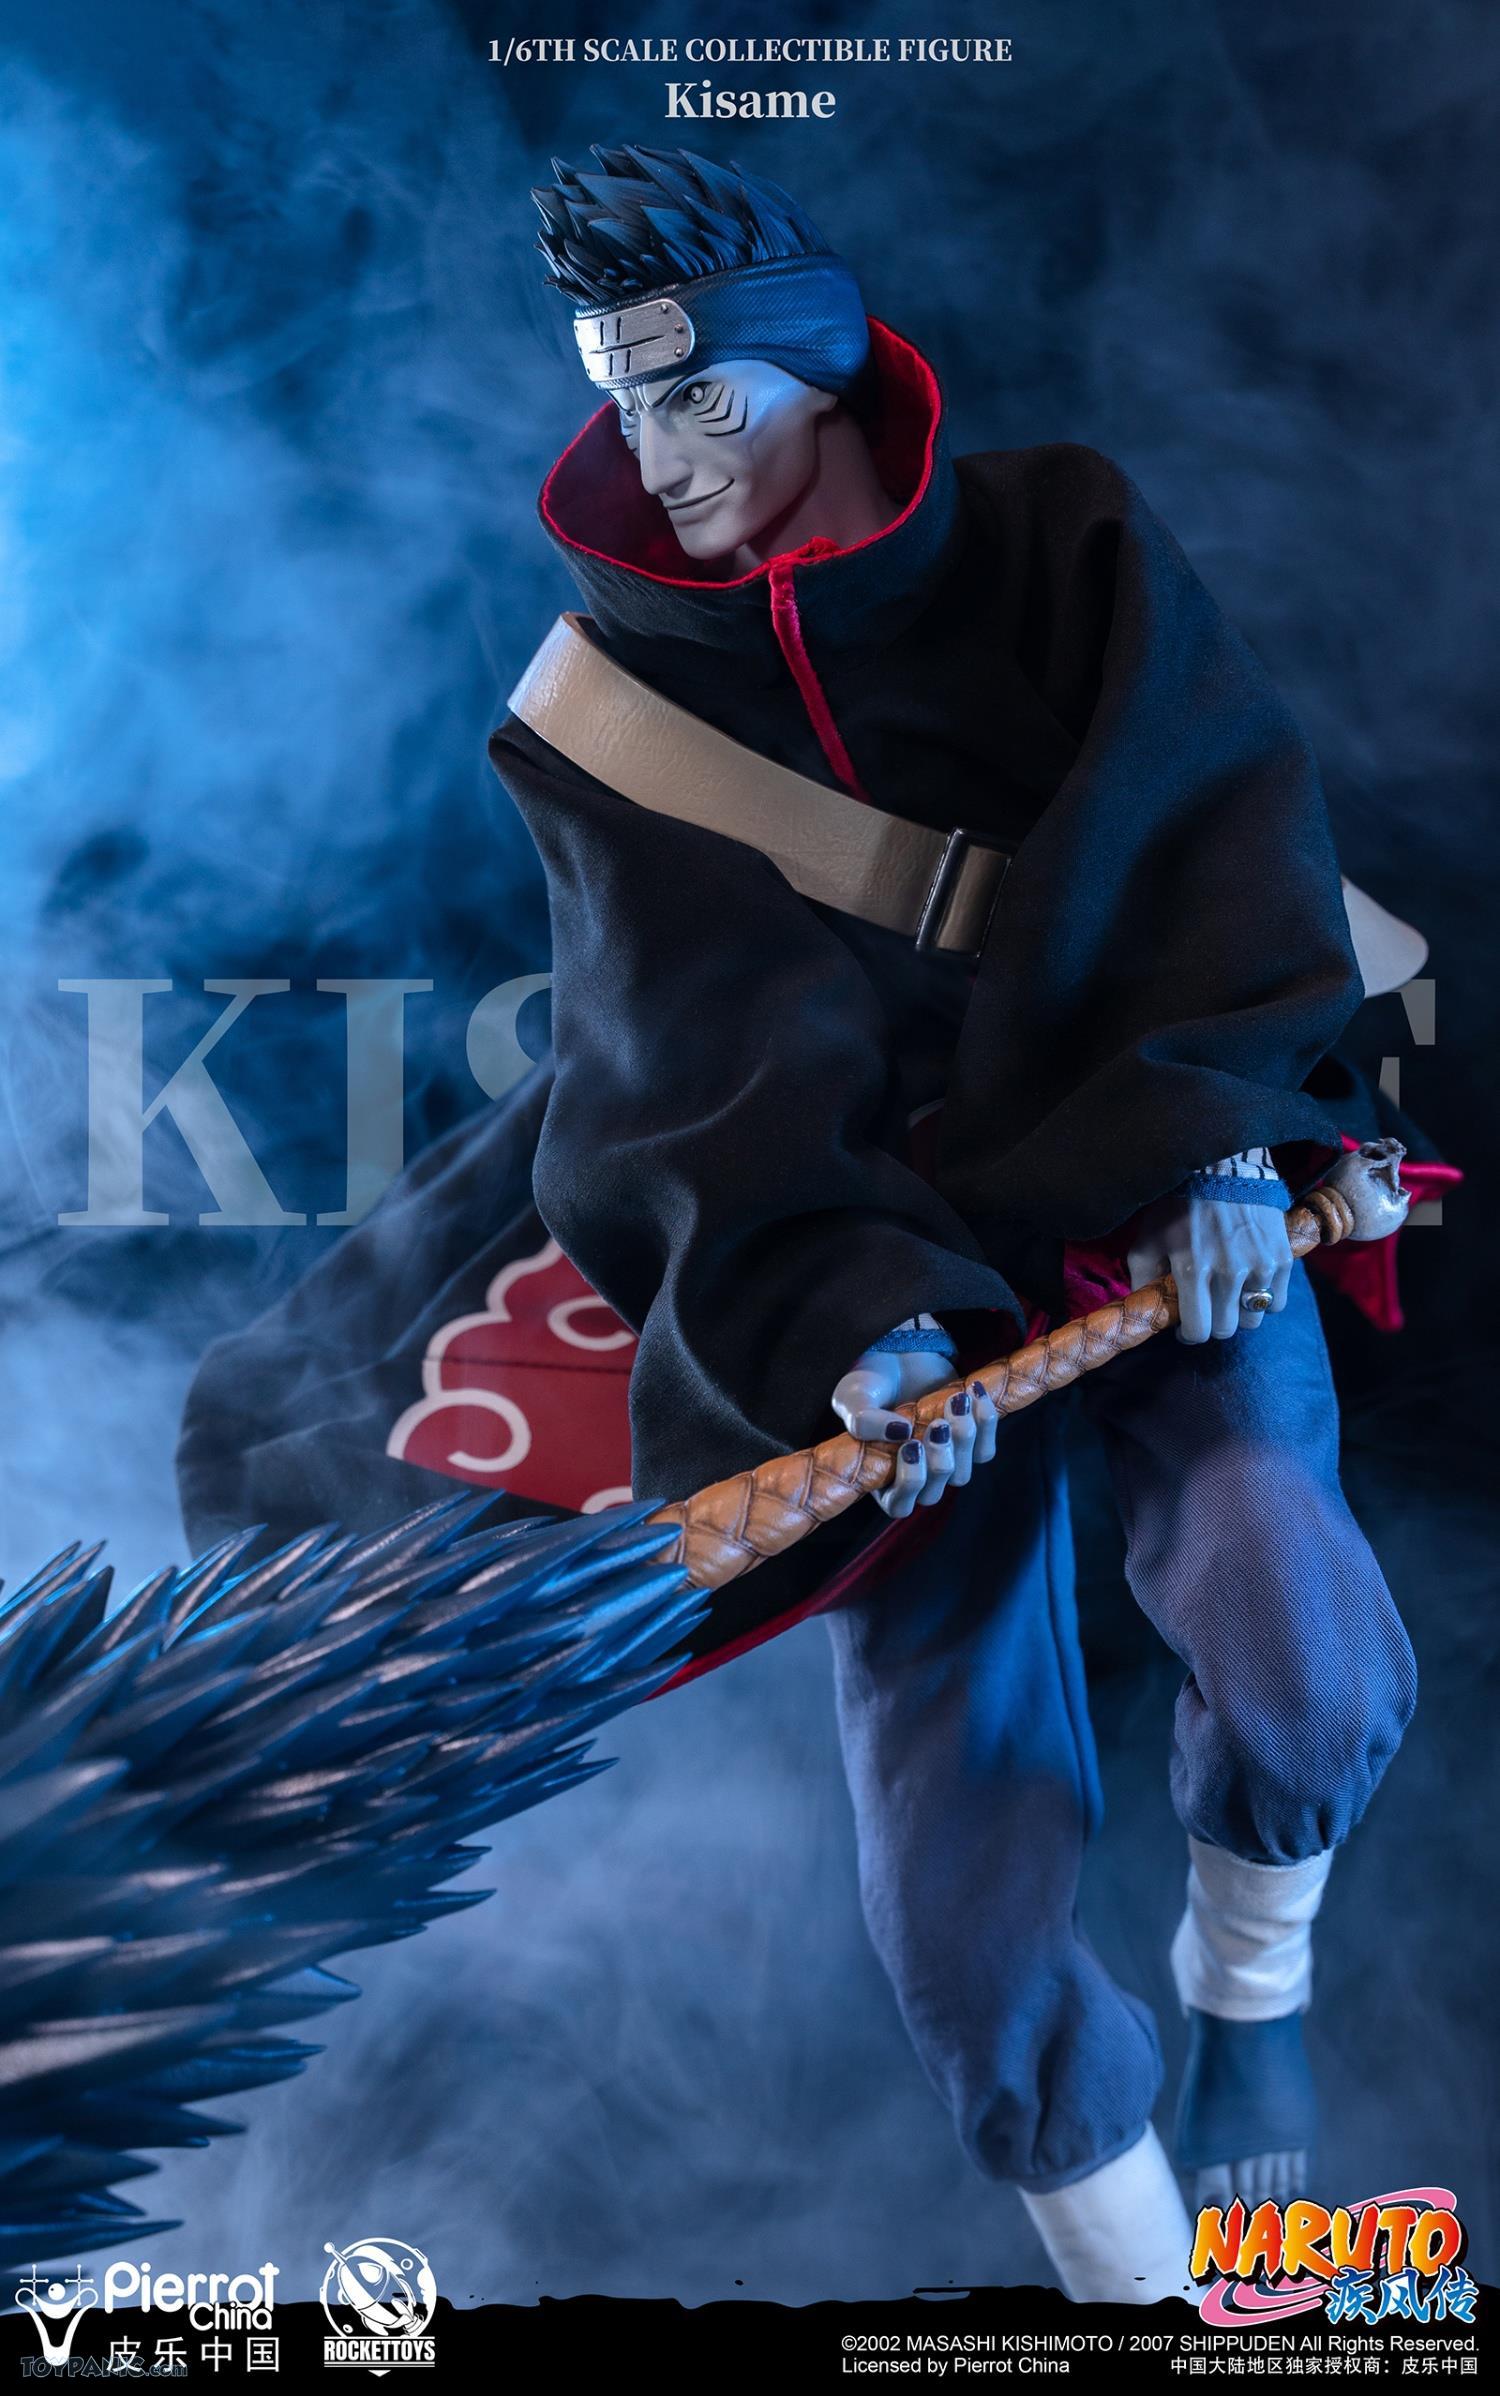 pierrot - NEW PRODUCT: Rocket Toys ROC-007 1/6 Scale Kisame 221202460436PM_2163868